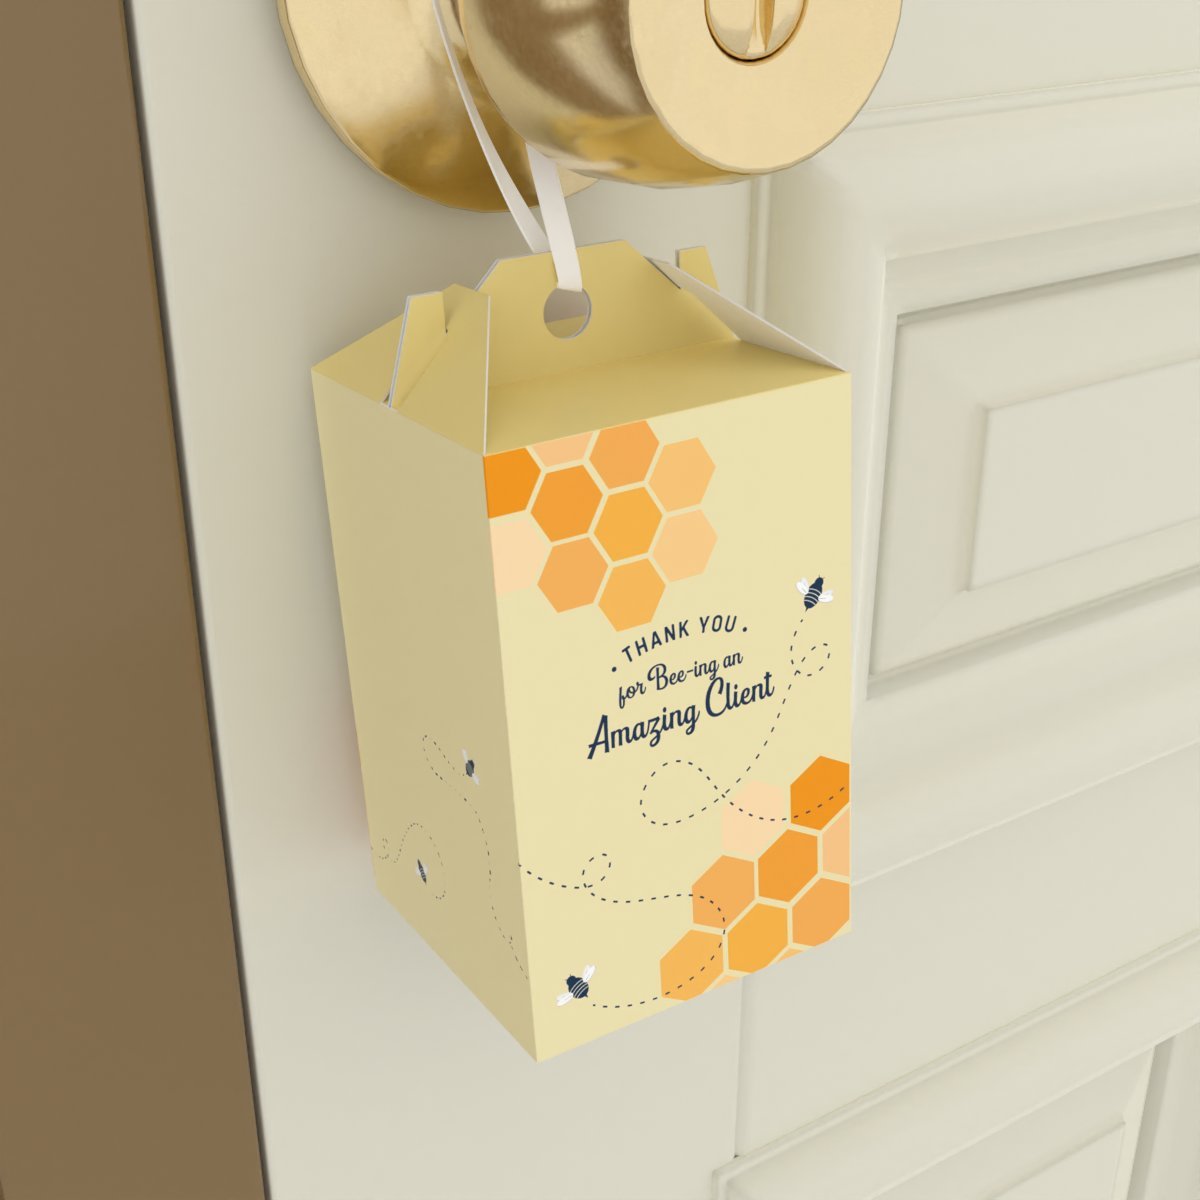 Candy Cartons - Thank You for Bee-ing an Amazing Client! - All Things Real Estate